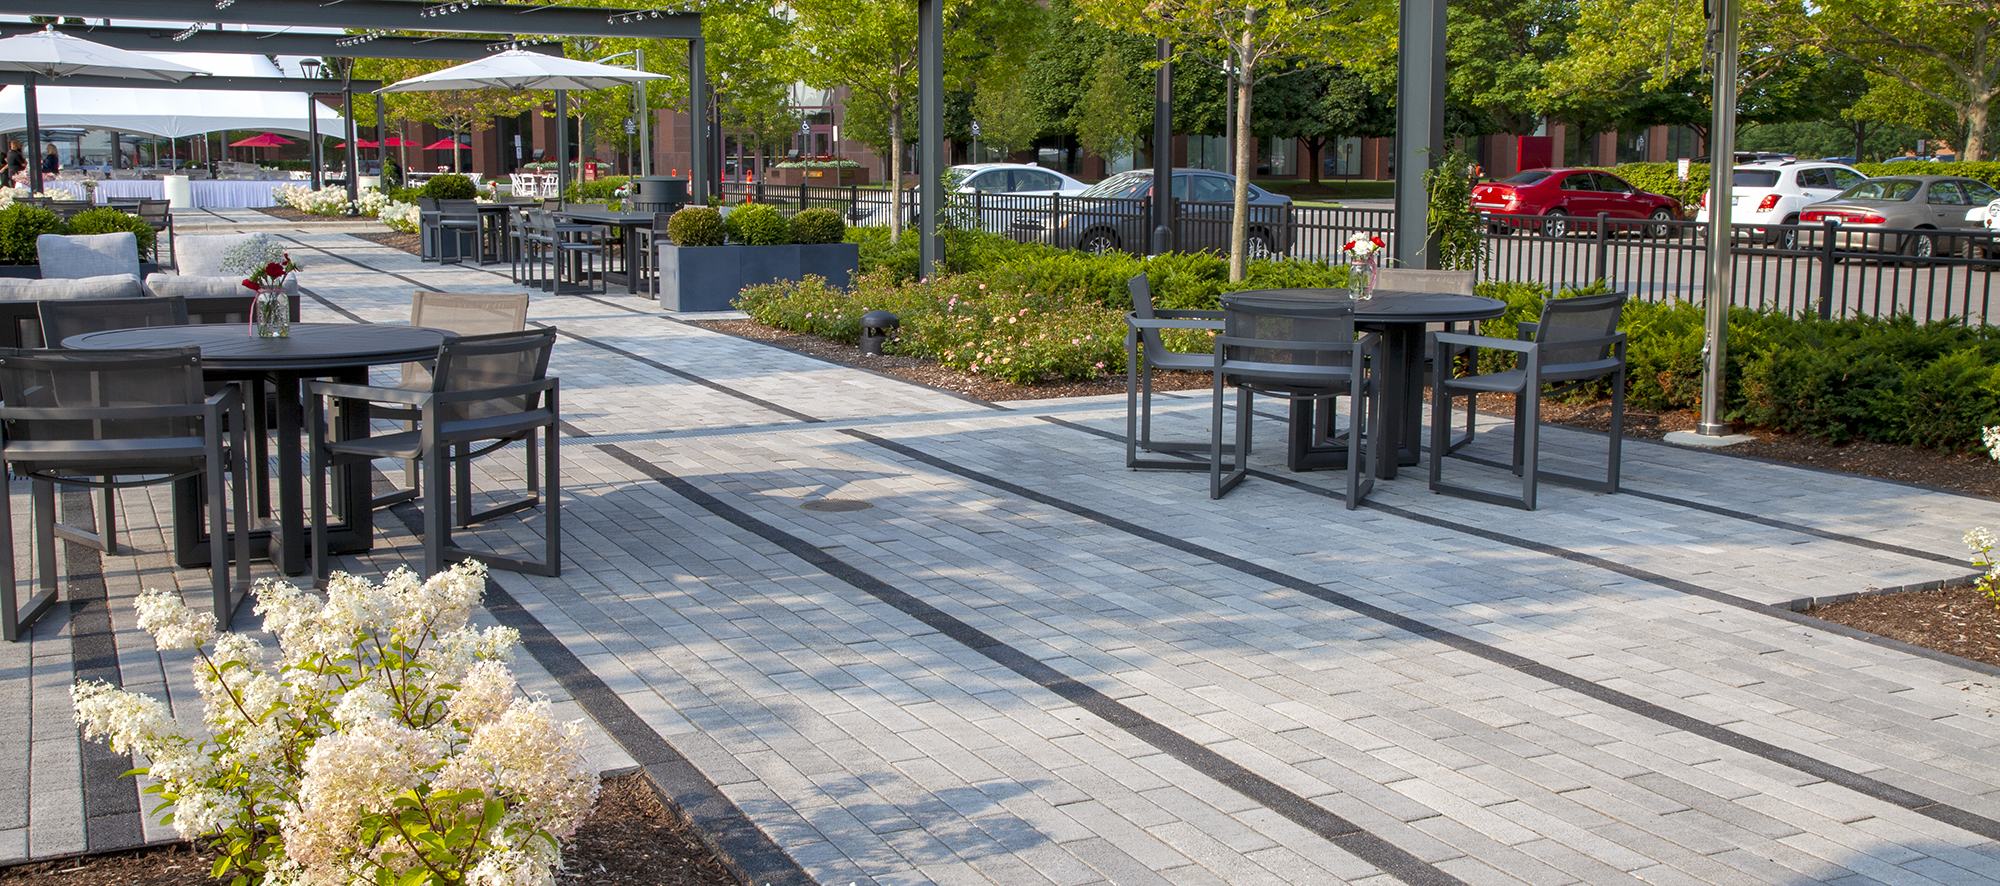 Two-toned Promenade Plank pavers delineate rows of walking spaces, with outdoor tables, chairs and umbrellas .